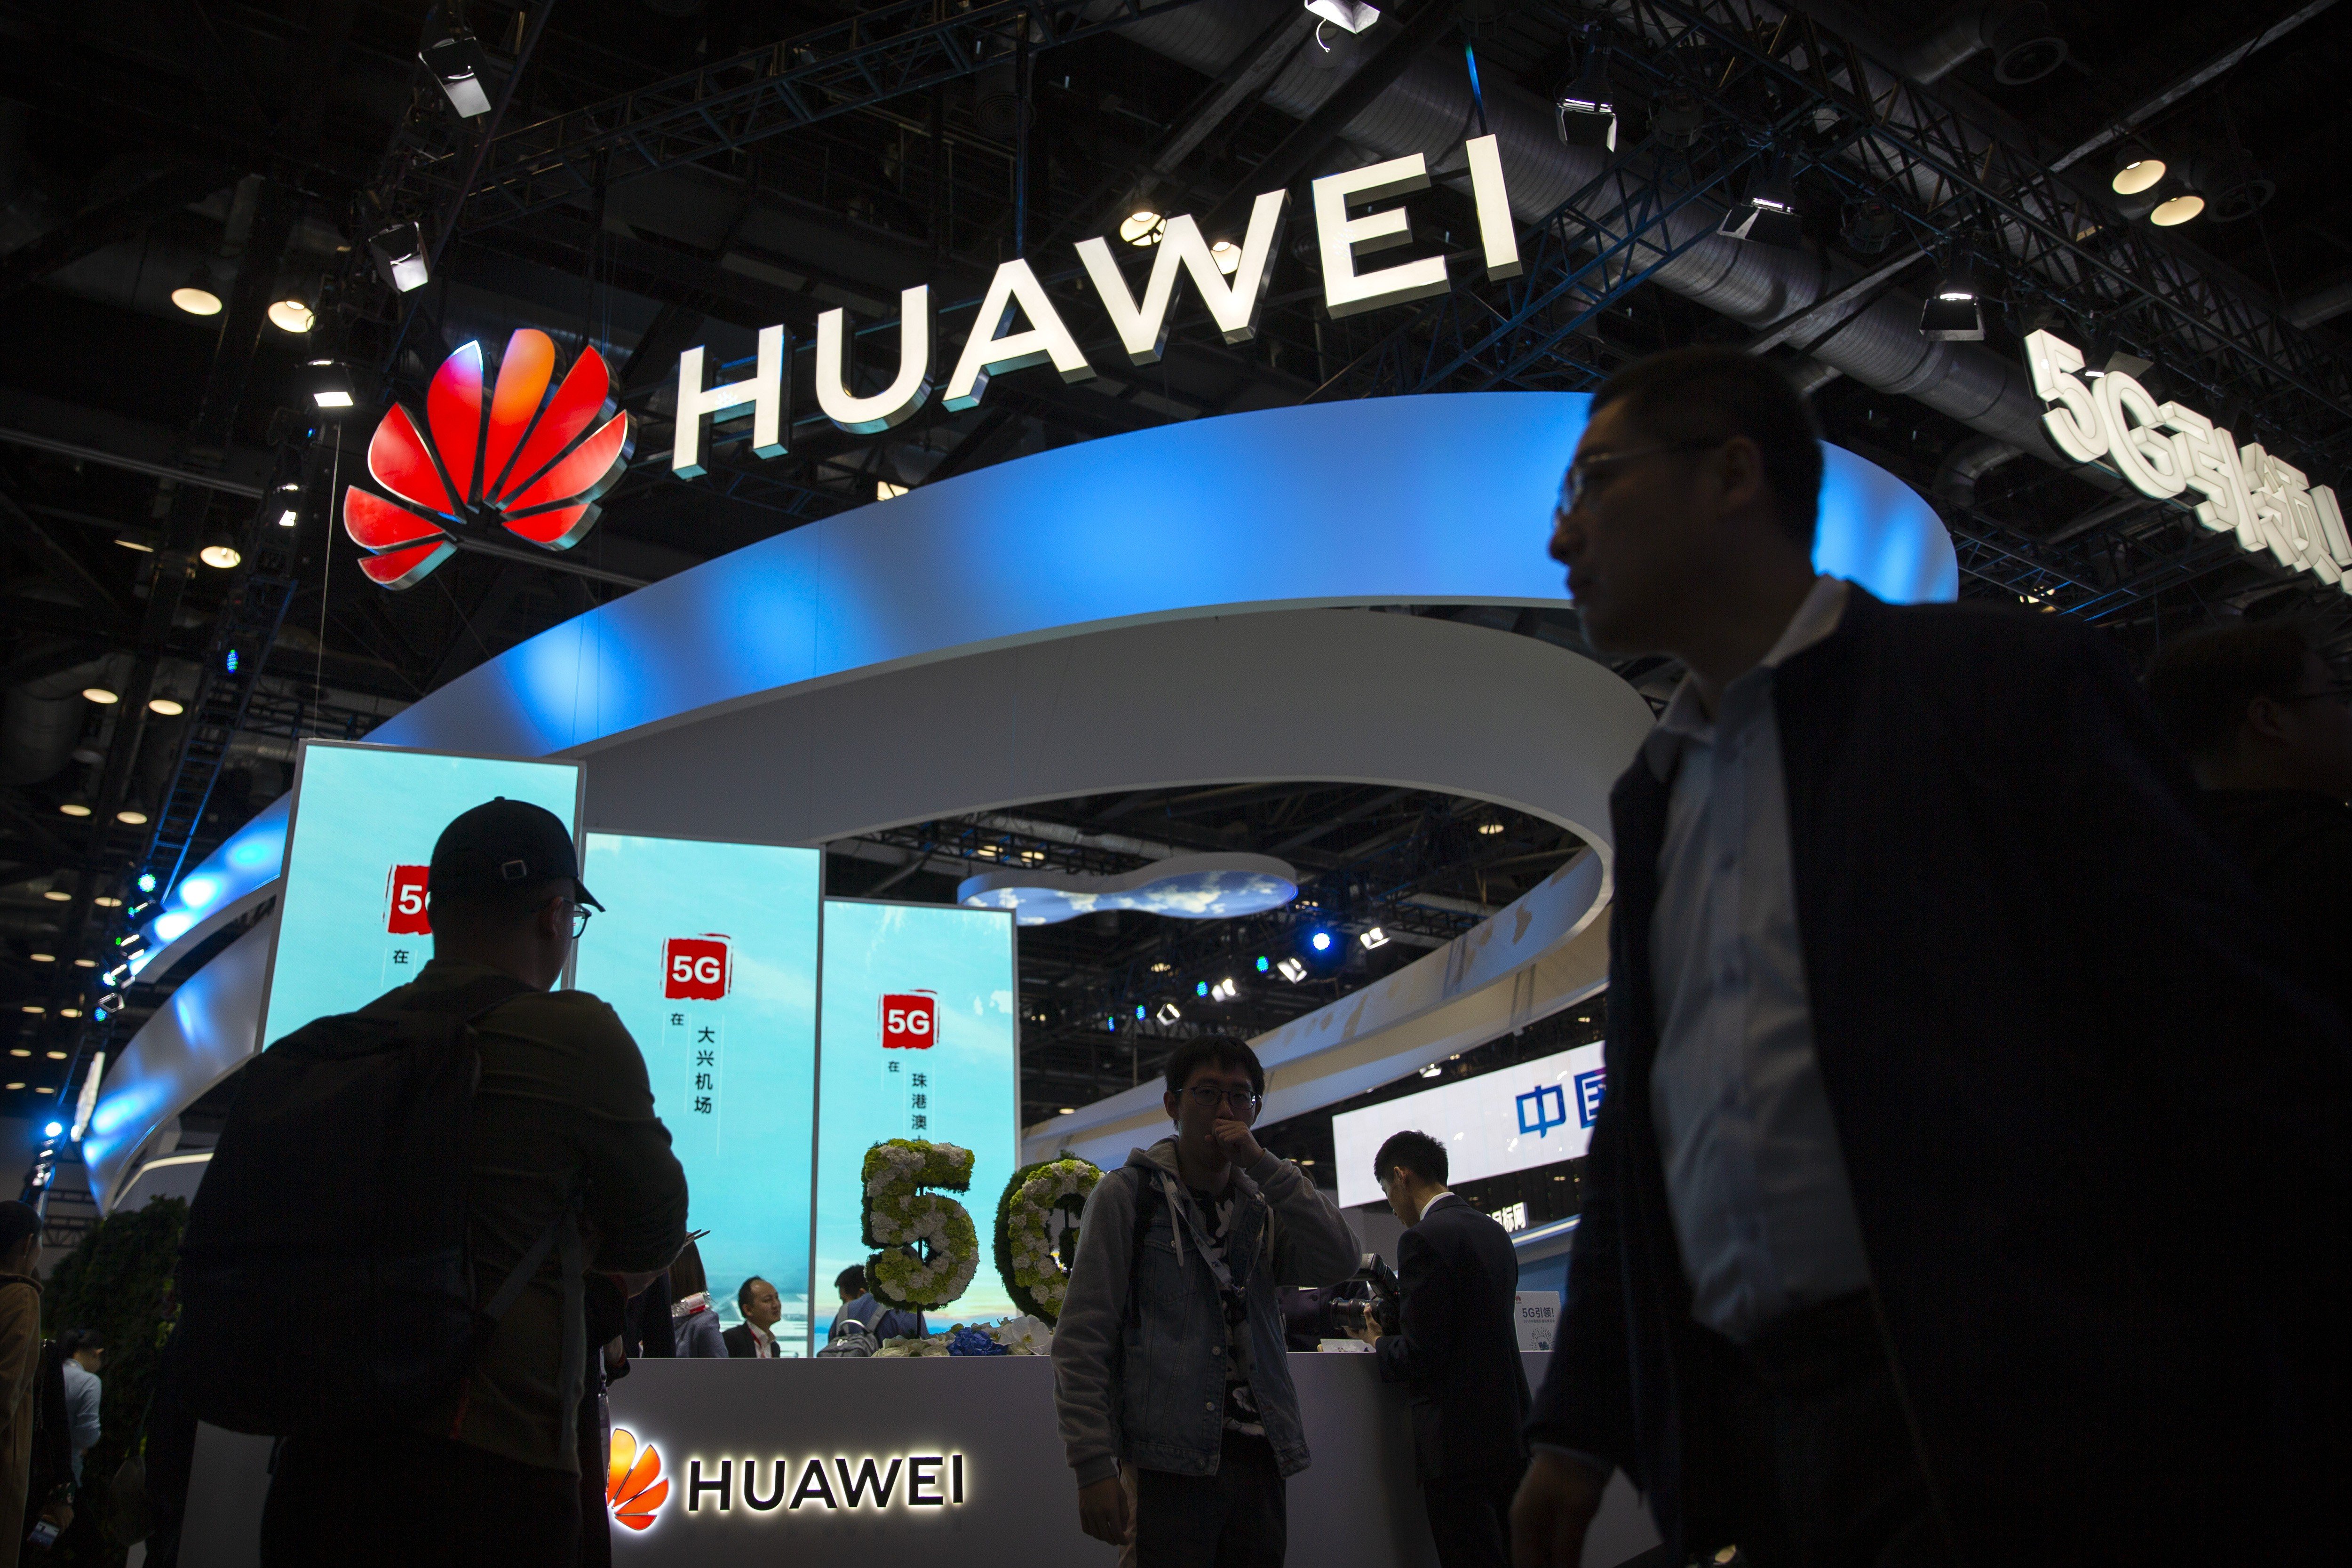 Attendees walk past a display for 5G services from Chinese technology firm Huawei at the PT Expo in Beijing, Oct. 31, 2019. Photo: AP